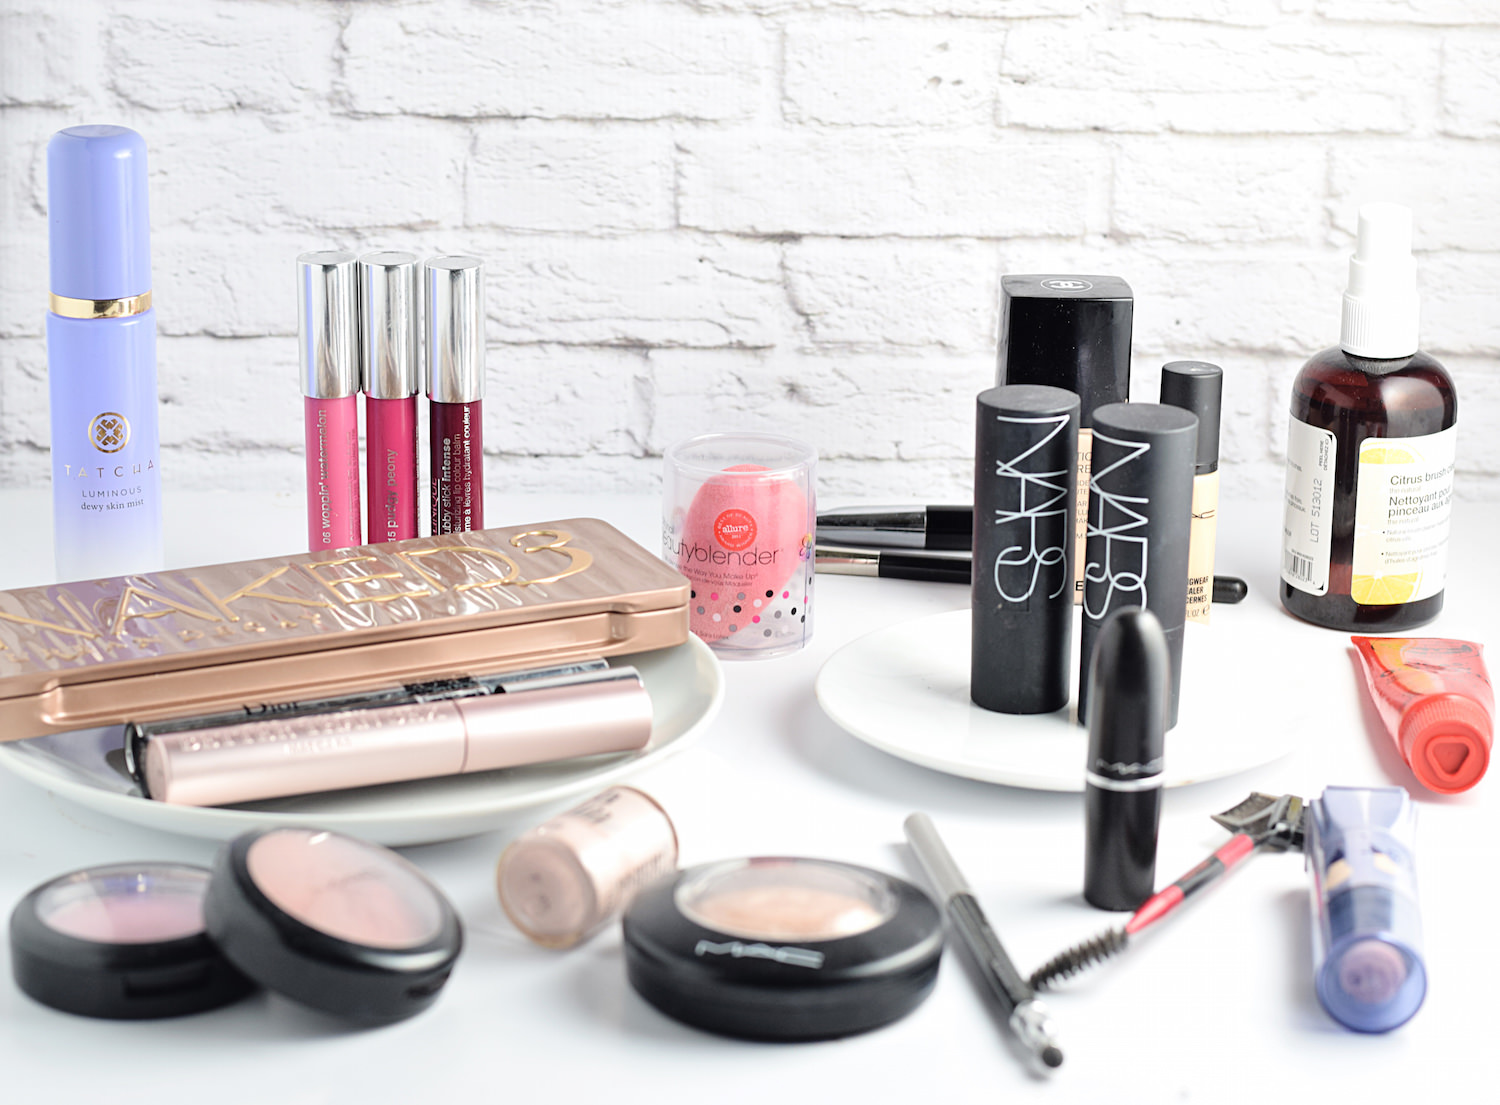 fokus krysantemum Omkostningsprocent My Current Favorite Makeup Products | Truffles and Trends